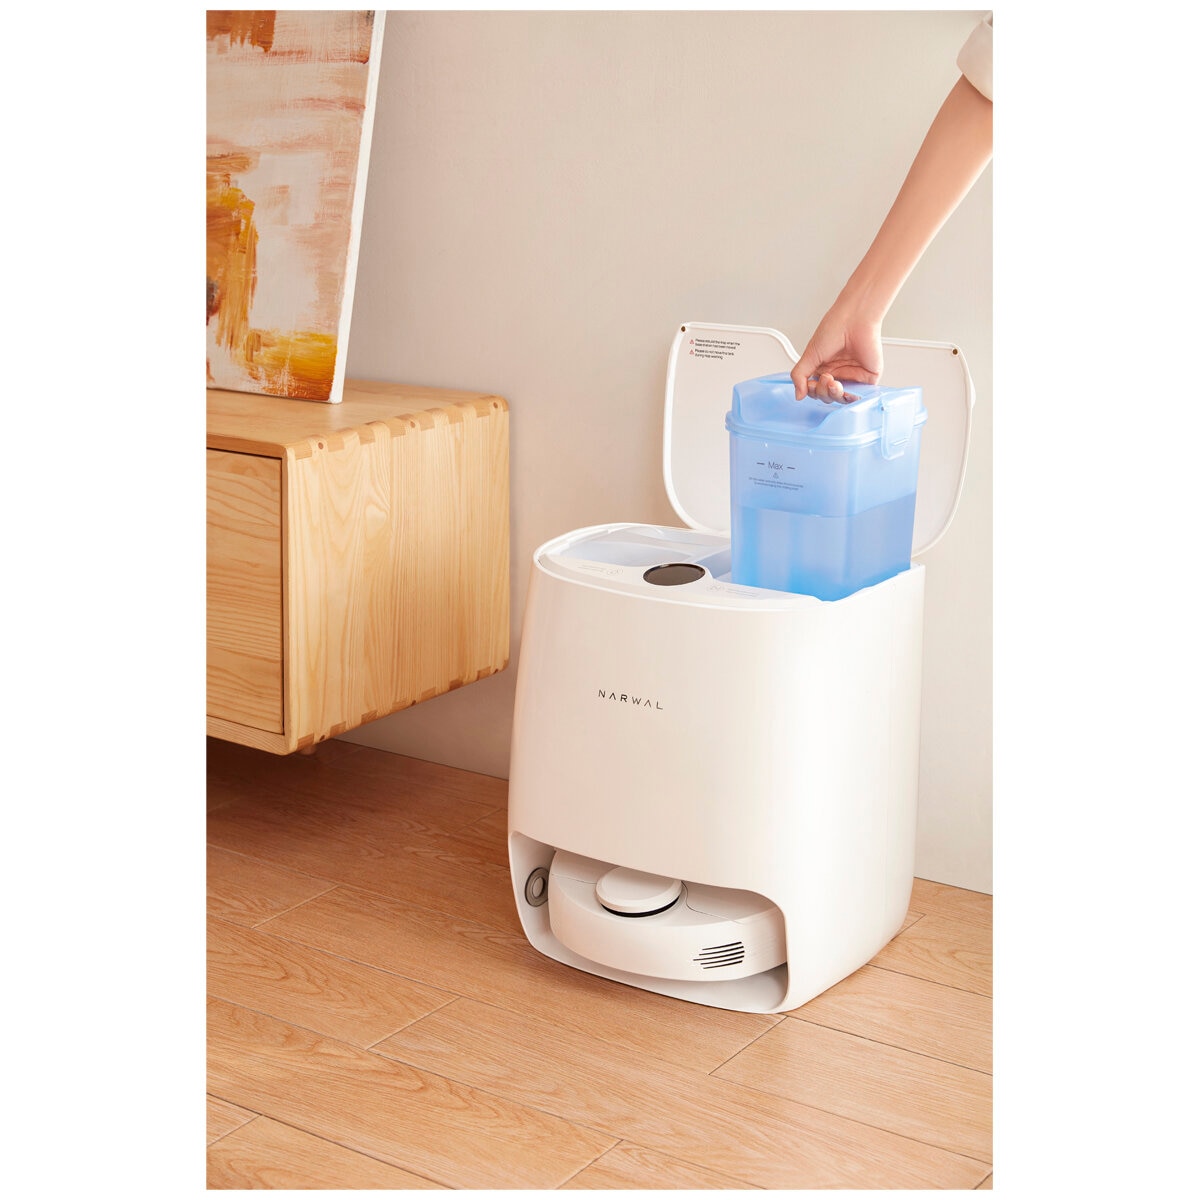 Narwal Self Cleaning Vacuuming and Mopping Robot Cleaner T10